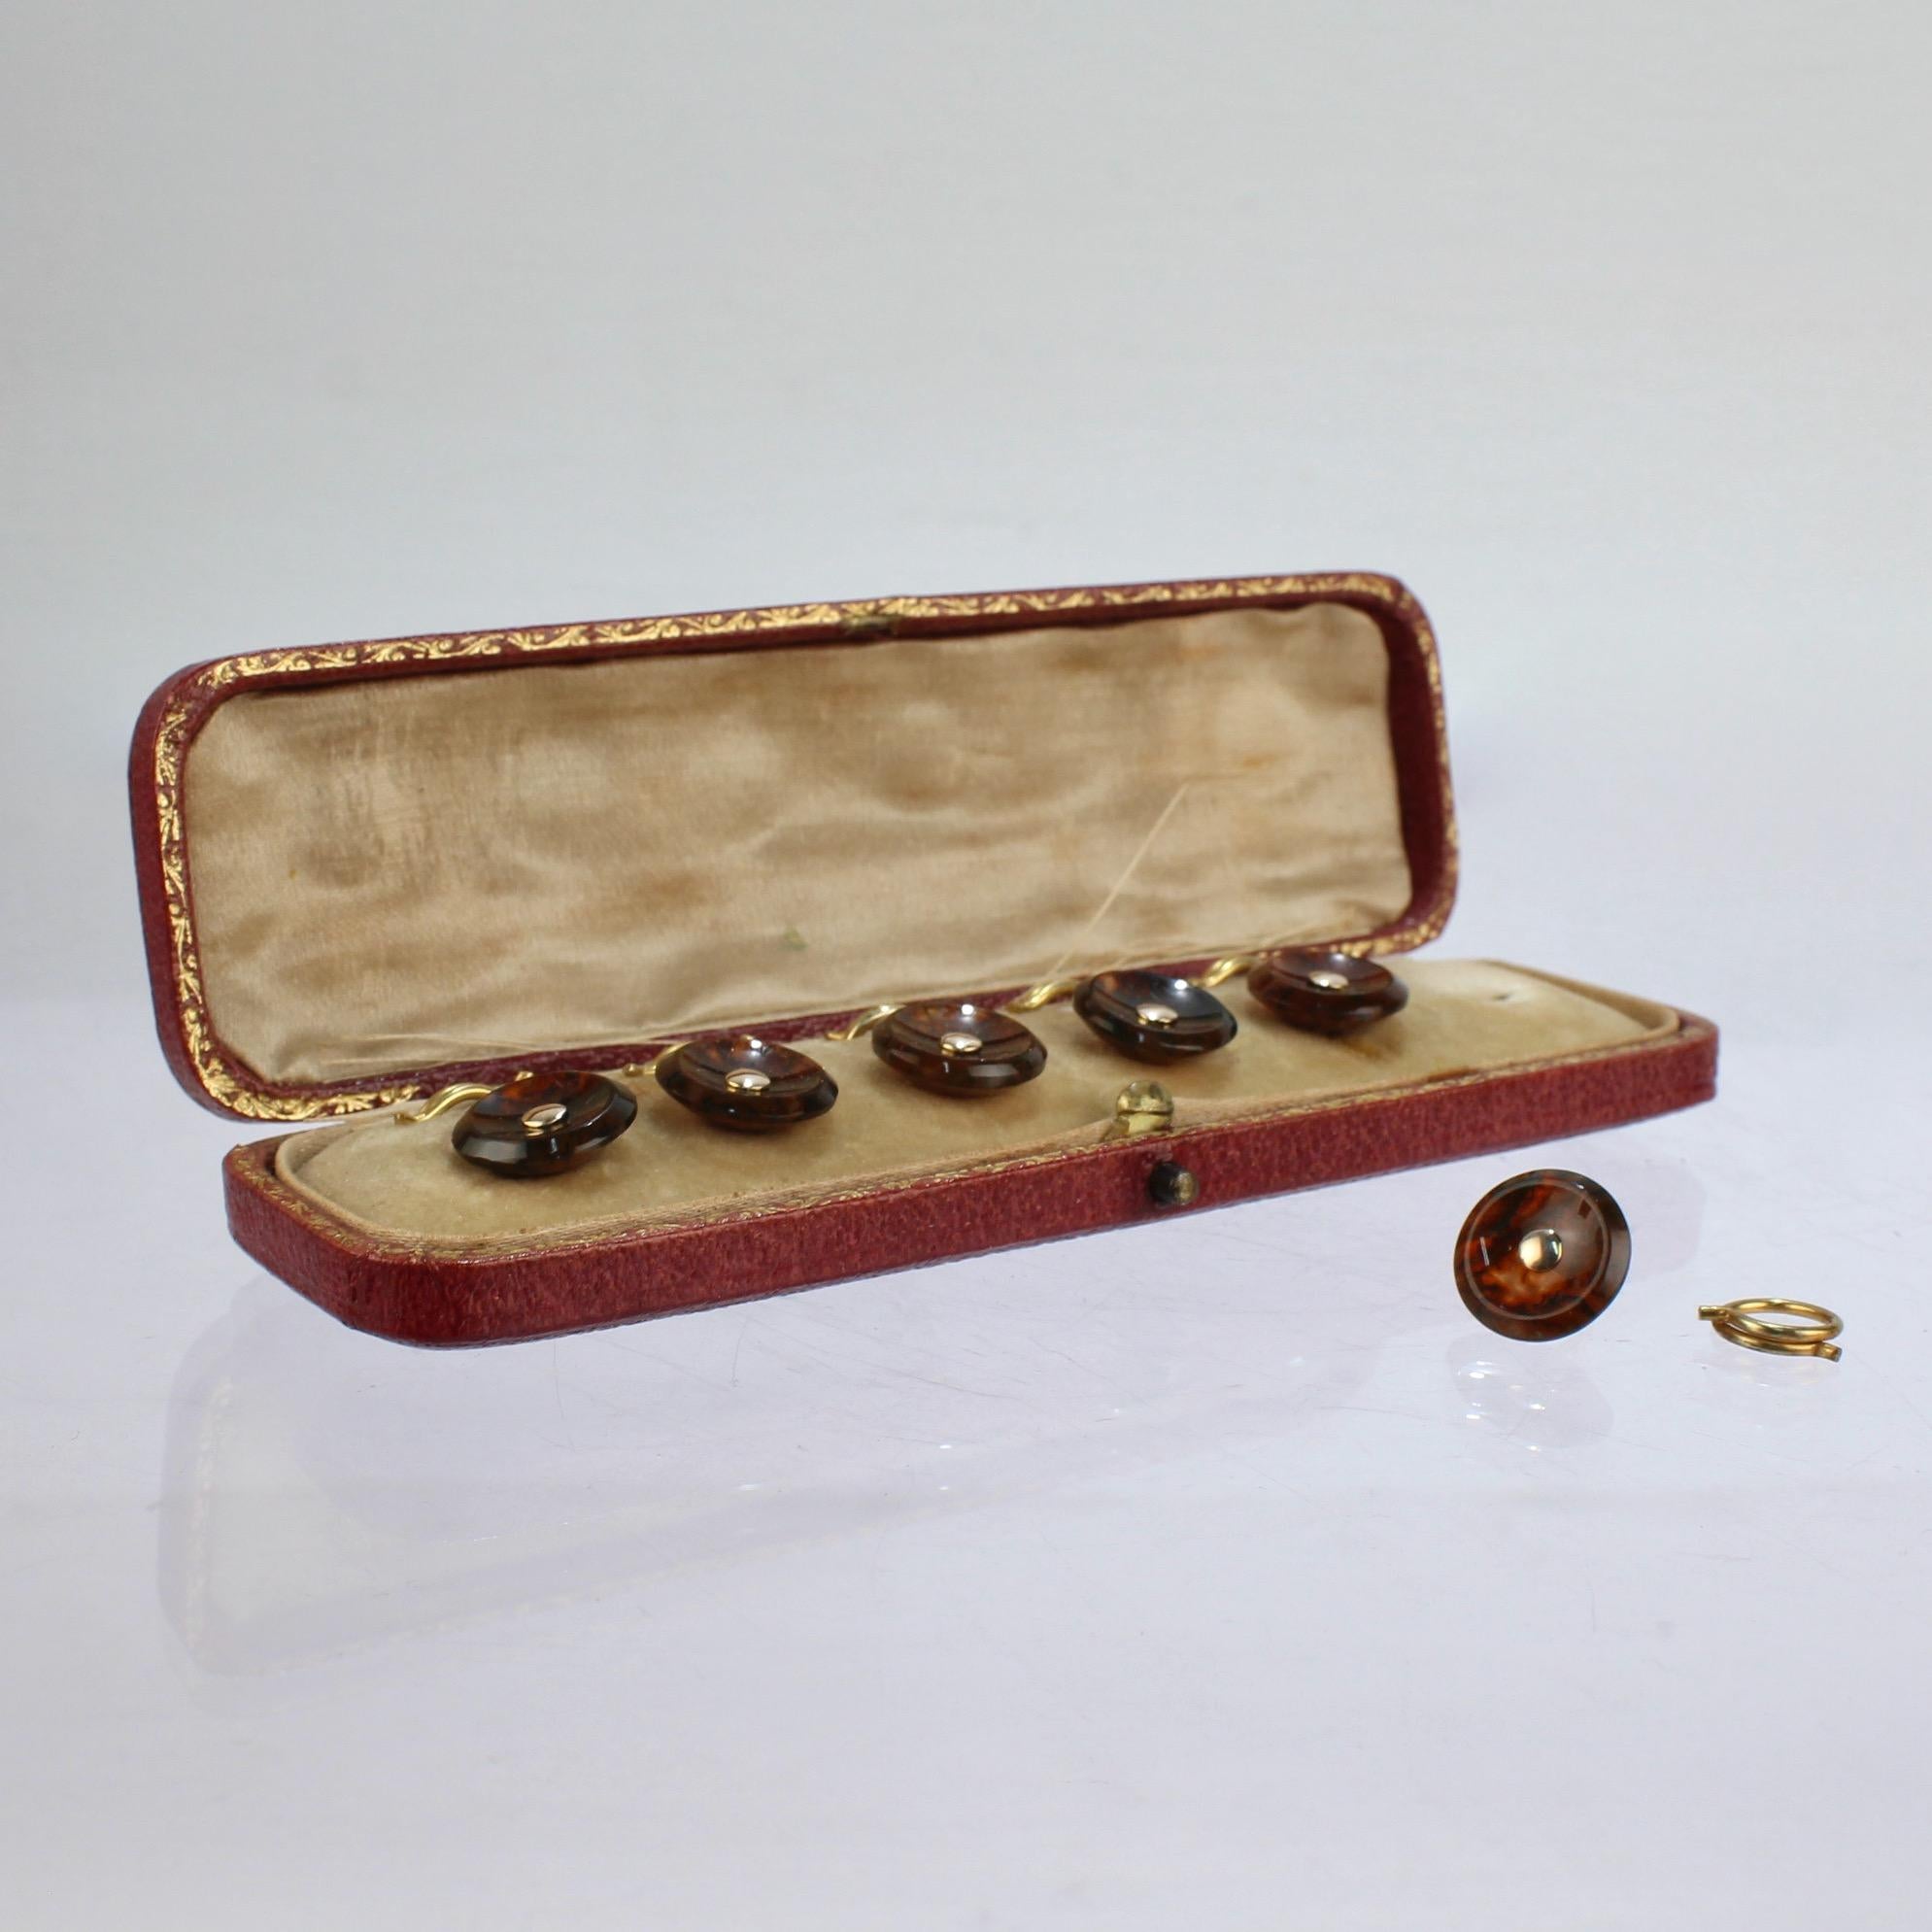 A very fine antique Victorian 10k gold & red moss agate shirt button set.

Round red moss agate buttons with round gold center and findings that come in its original fitted box.

A smart Victorian button set!

Date:
19th Century

Overall